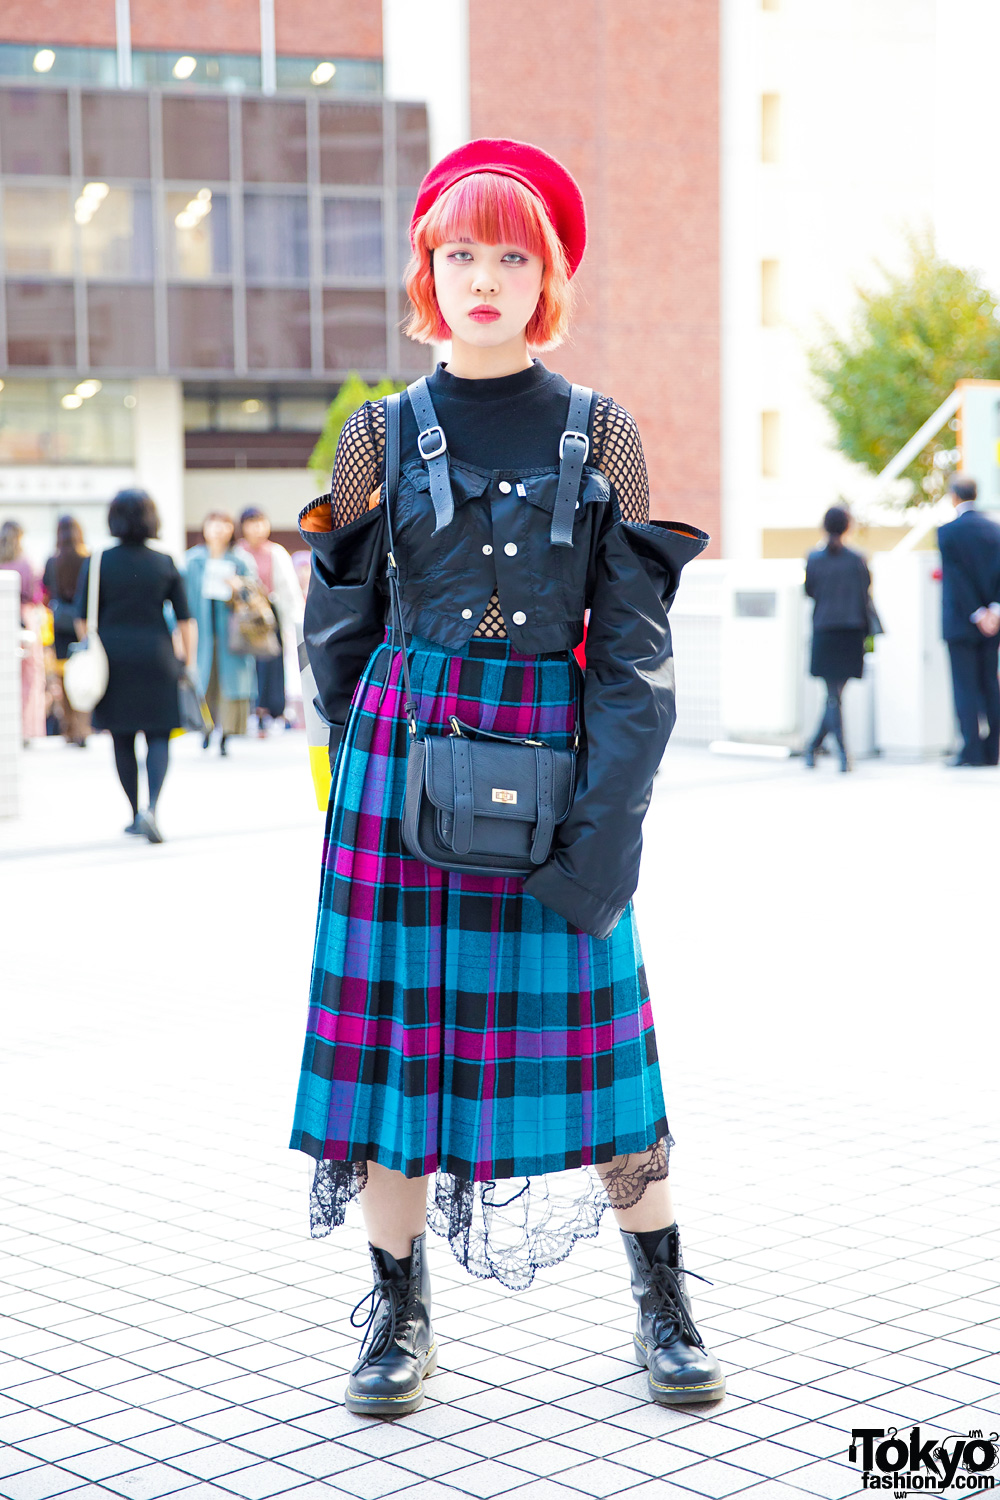 Plaid Pleated Midi Skirt, Fishnet Top, Black Lace, Beret & Dr. Martens Boots in Tokyo